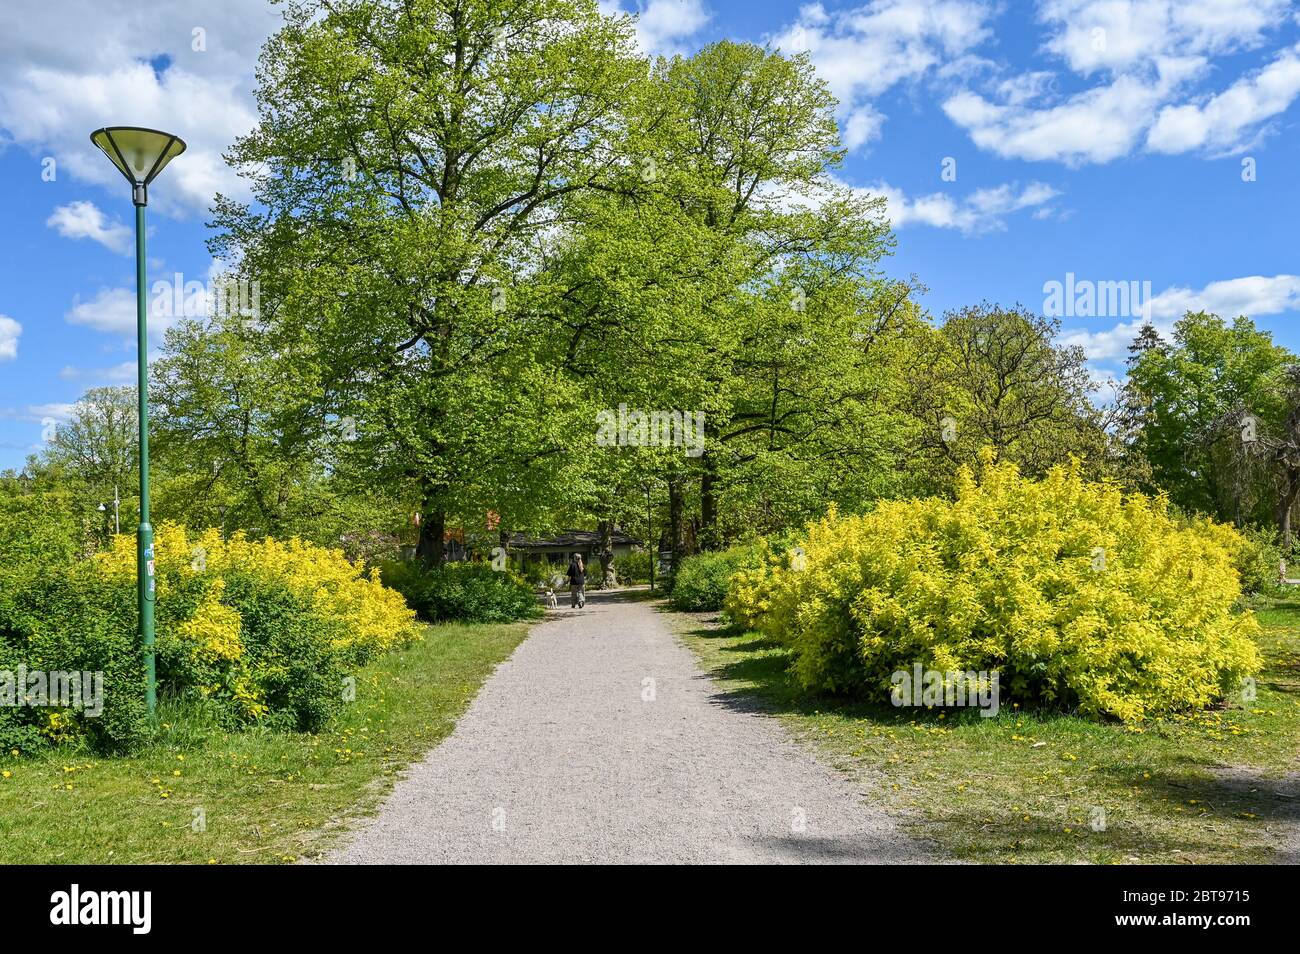 Unrecognizable person walks a dog in city park Folkparken during on a sunny day in May. Norrkoping is a historic industrial town in Sweden. Stock Photo